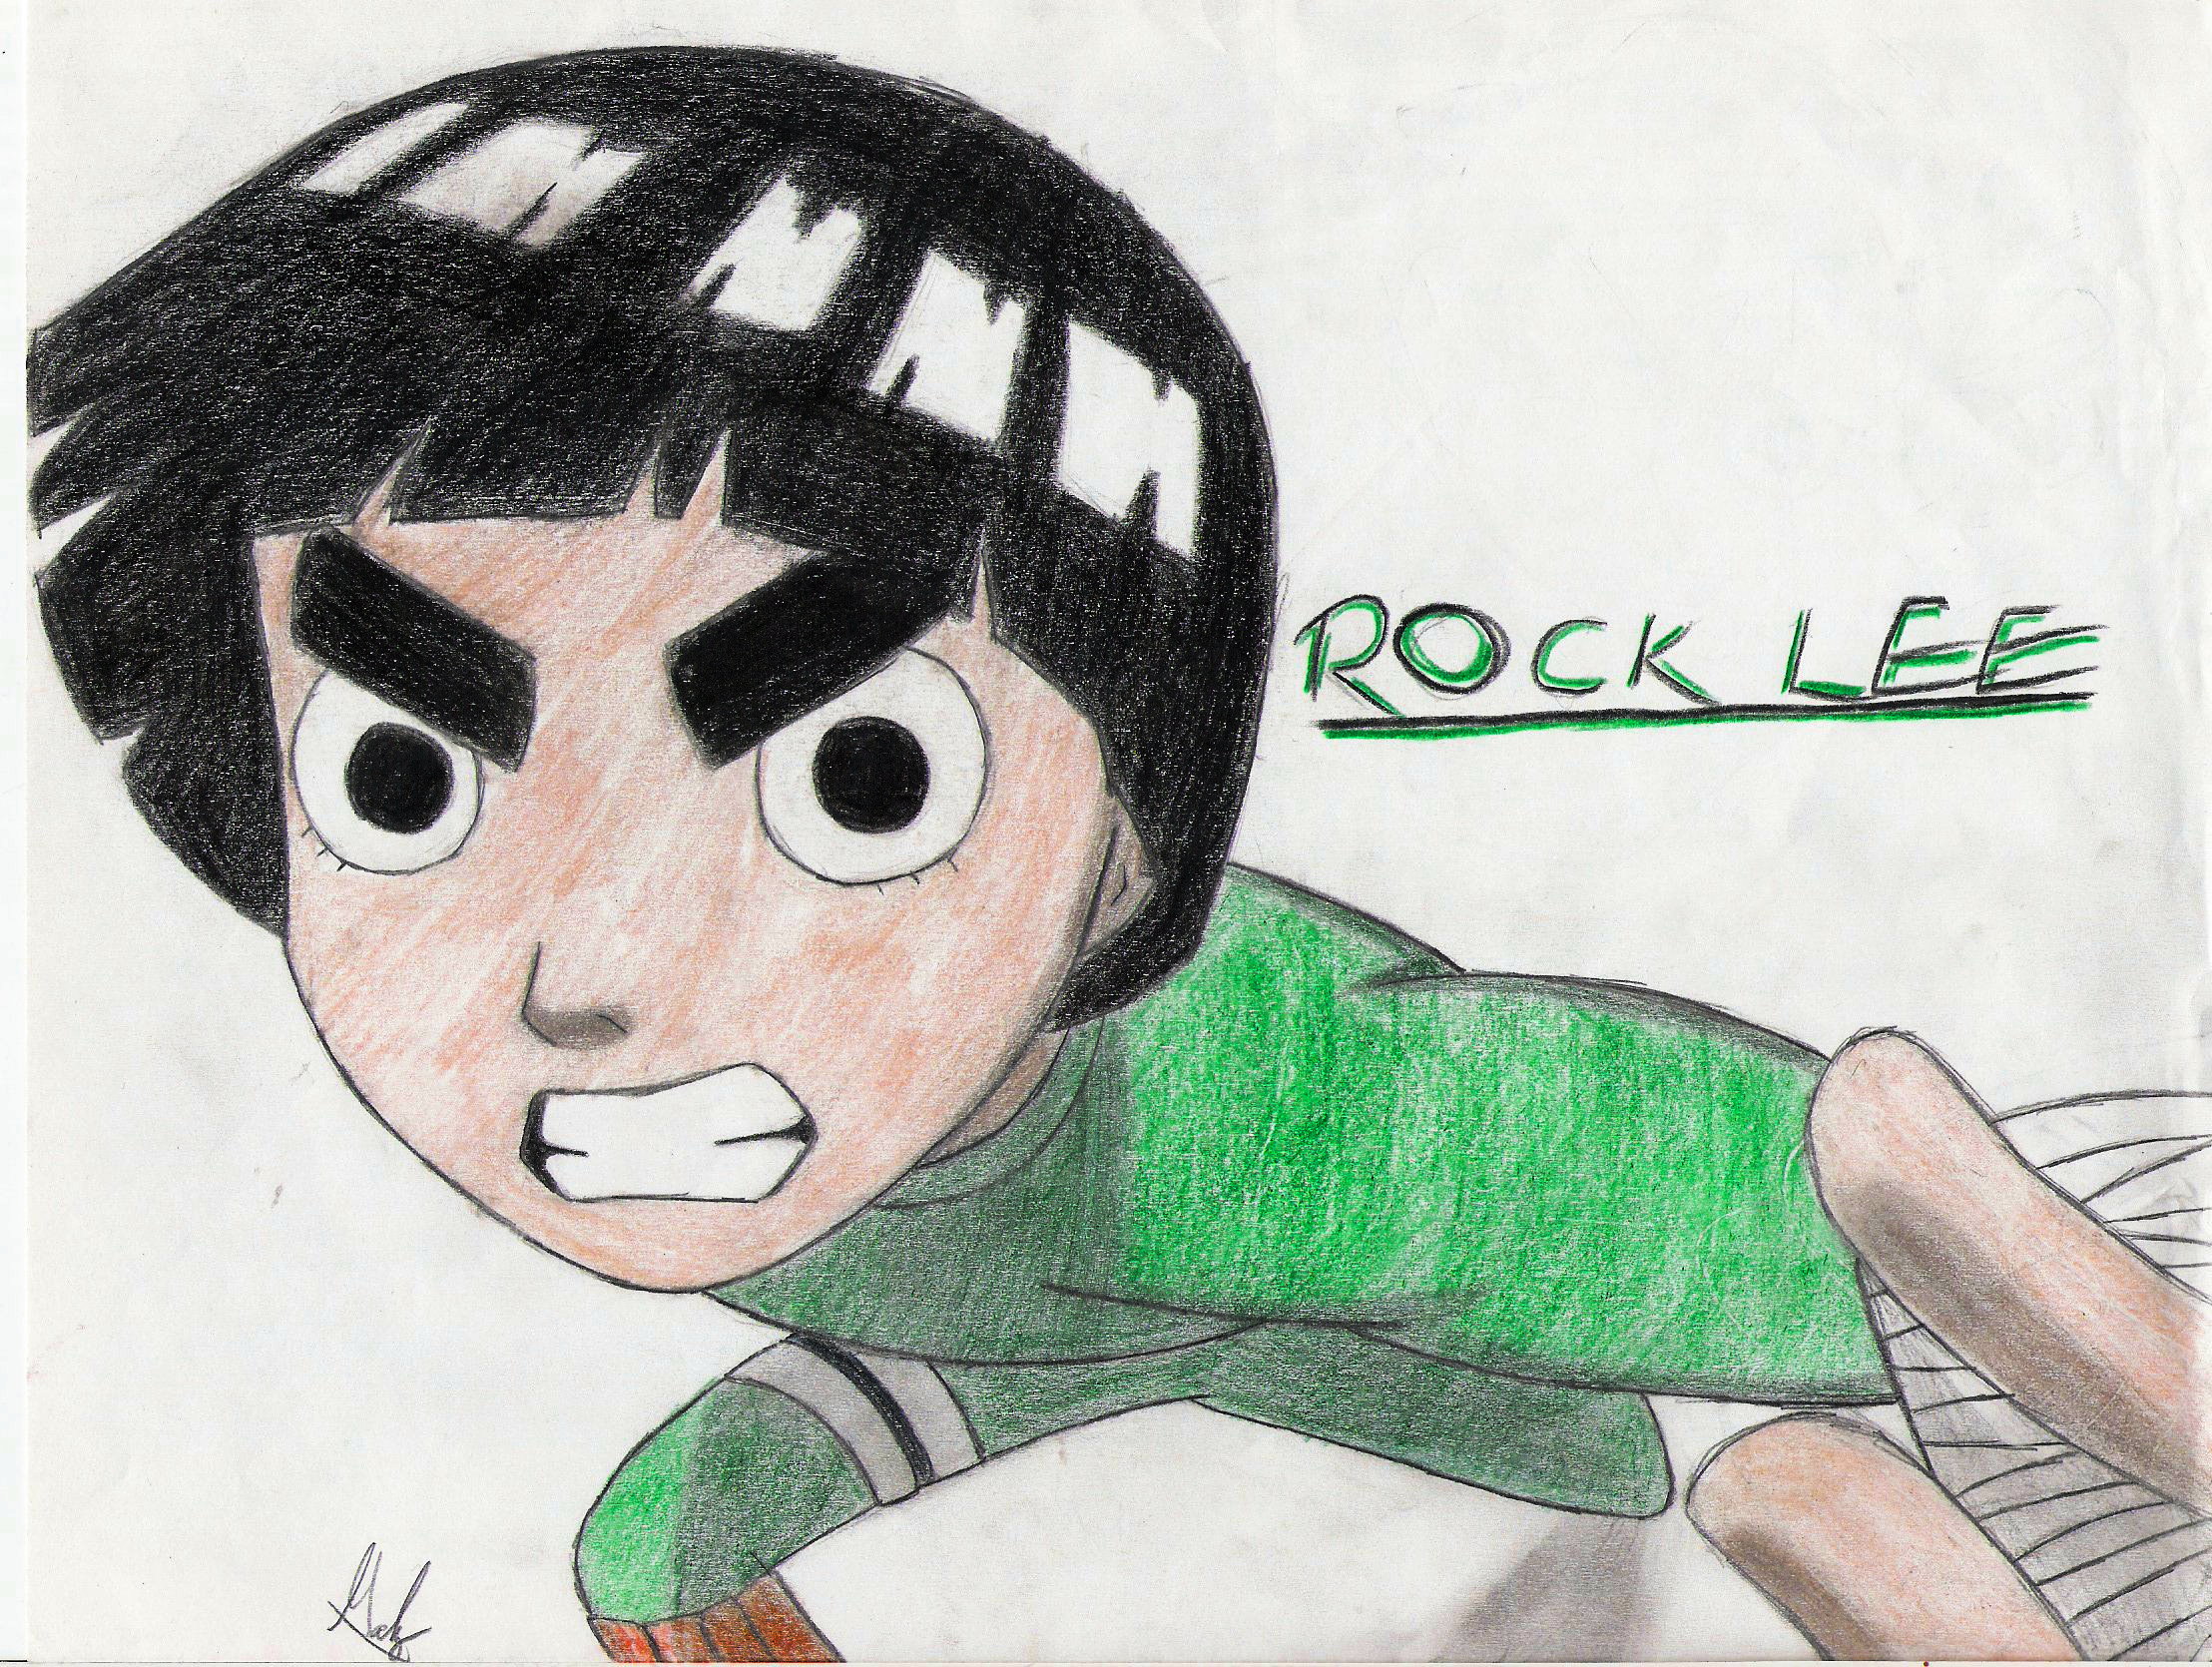 ROCK LEE IS AWSOME! by TheREALViolet